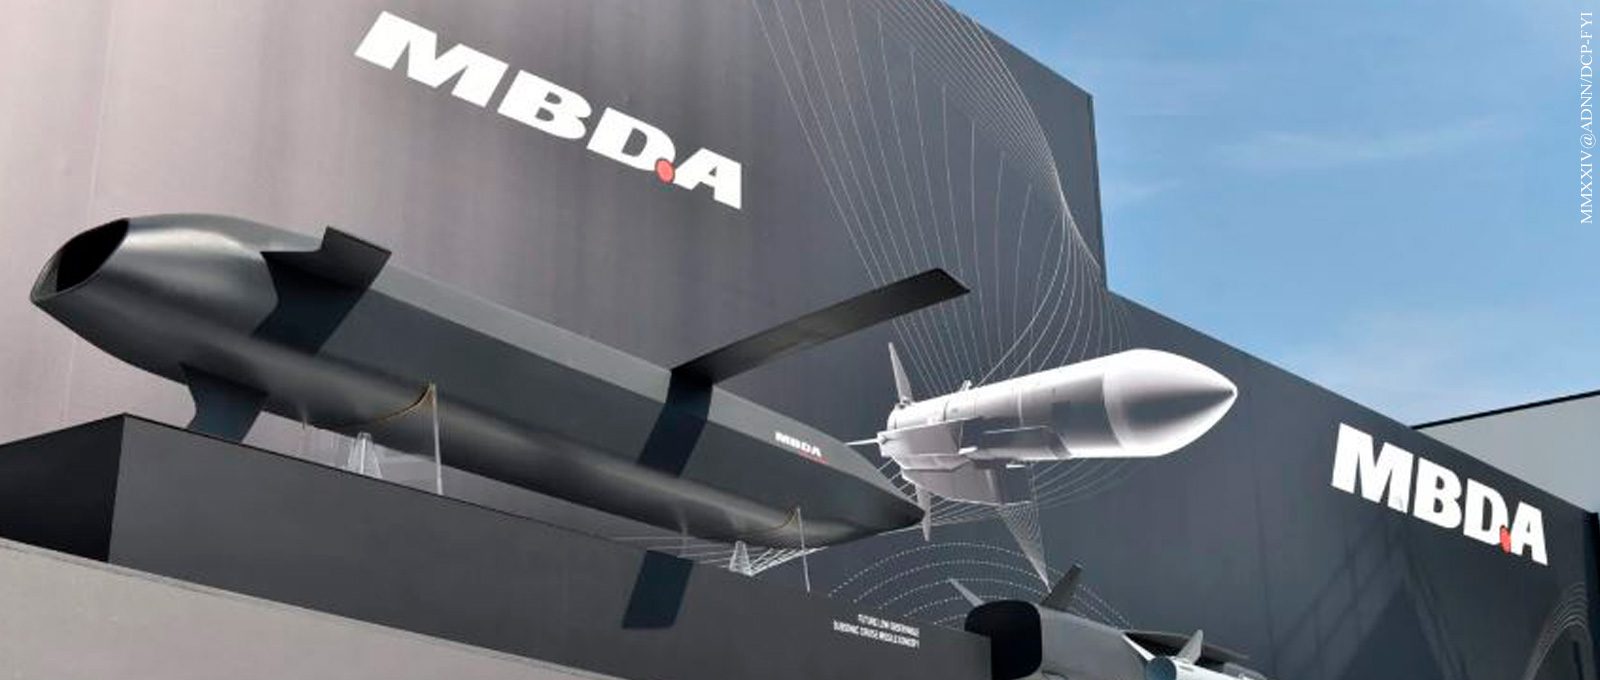 MBDA Enforcer missile production proposed for funding by the European Commission